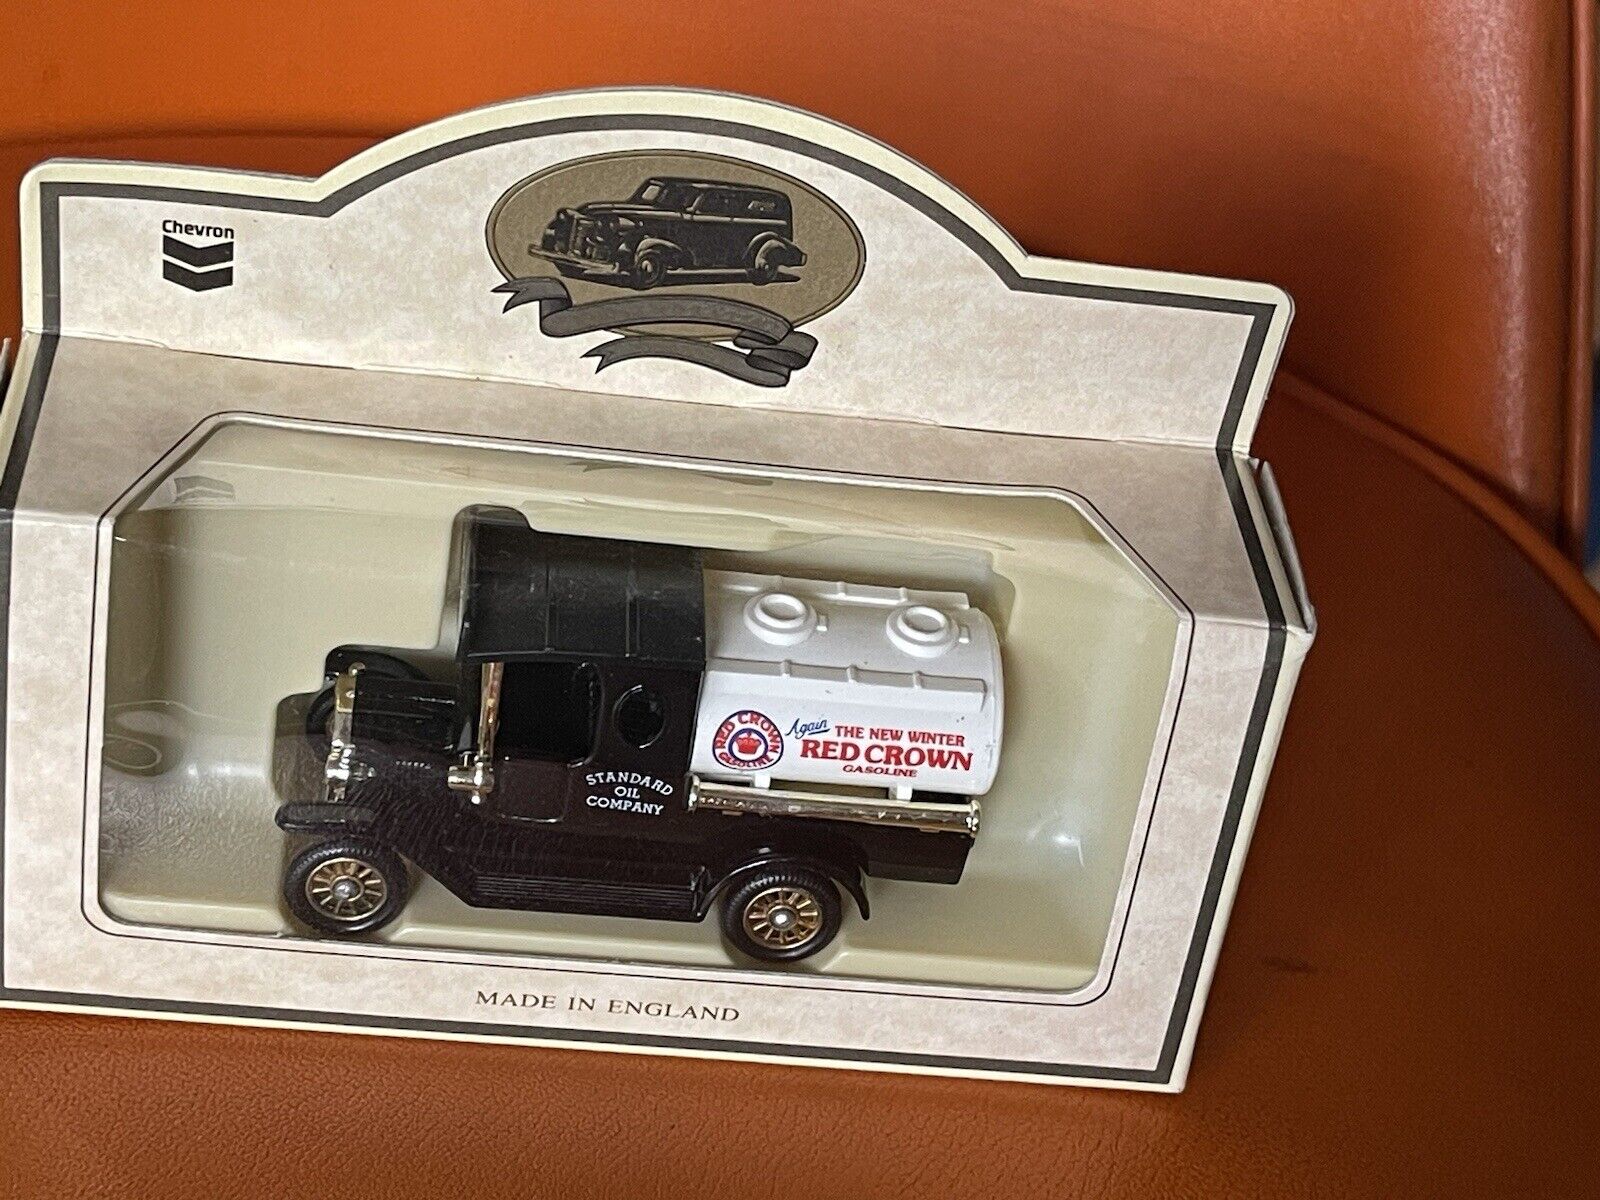 Lledo Die Cast metal Toy, The New Winter Red Crown Gasoline Truck, New in Box,